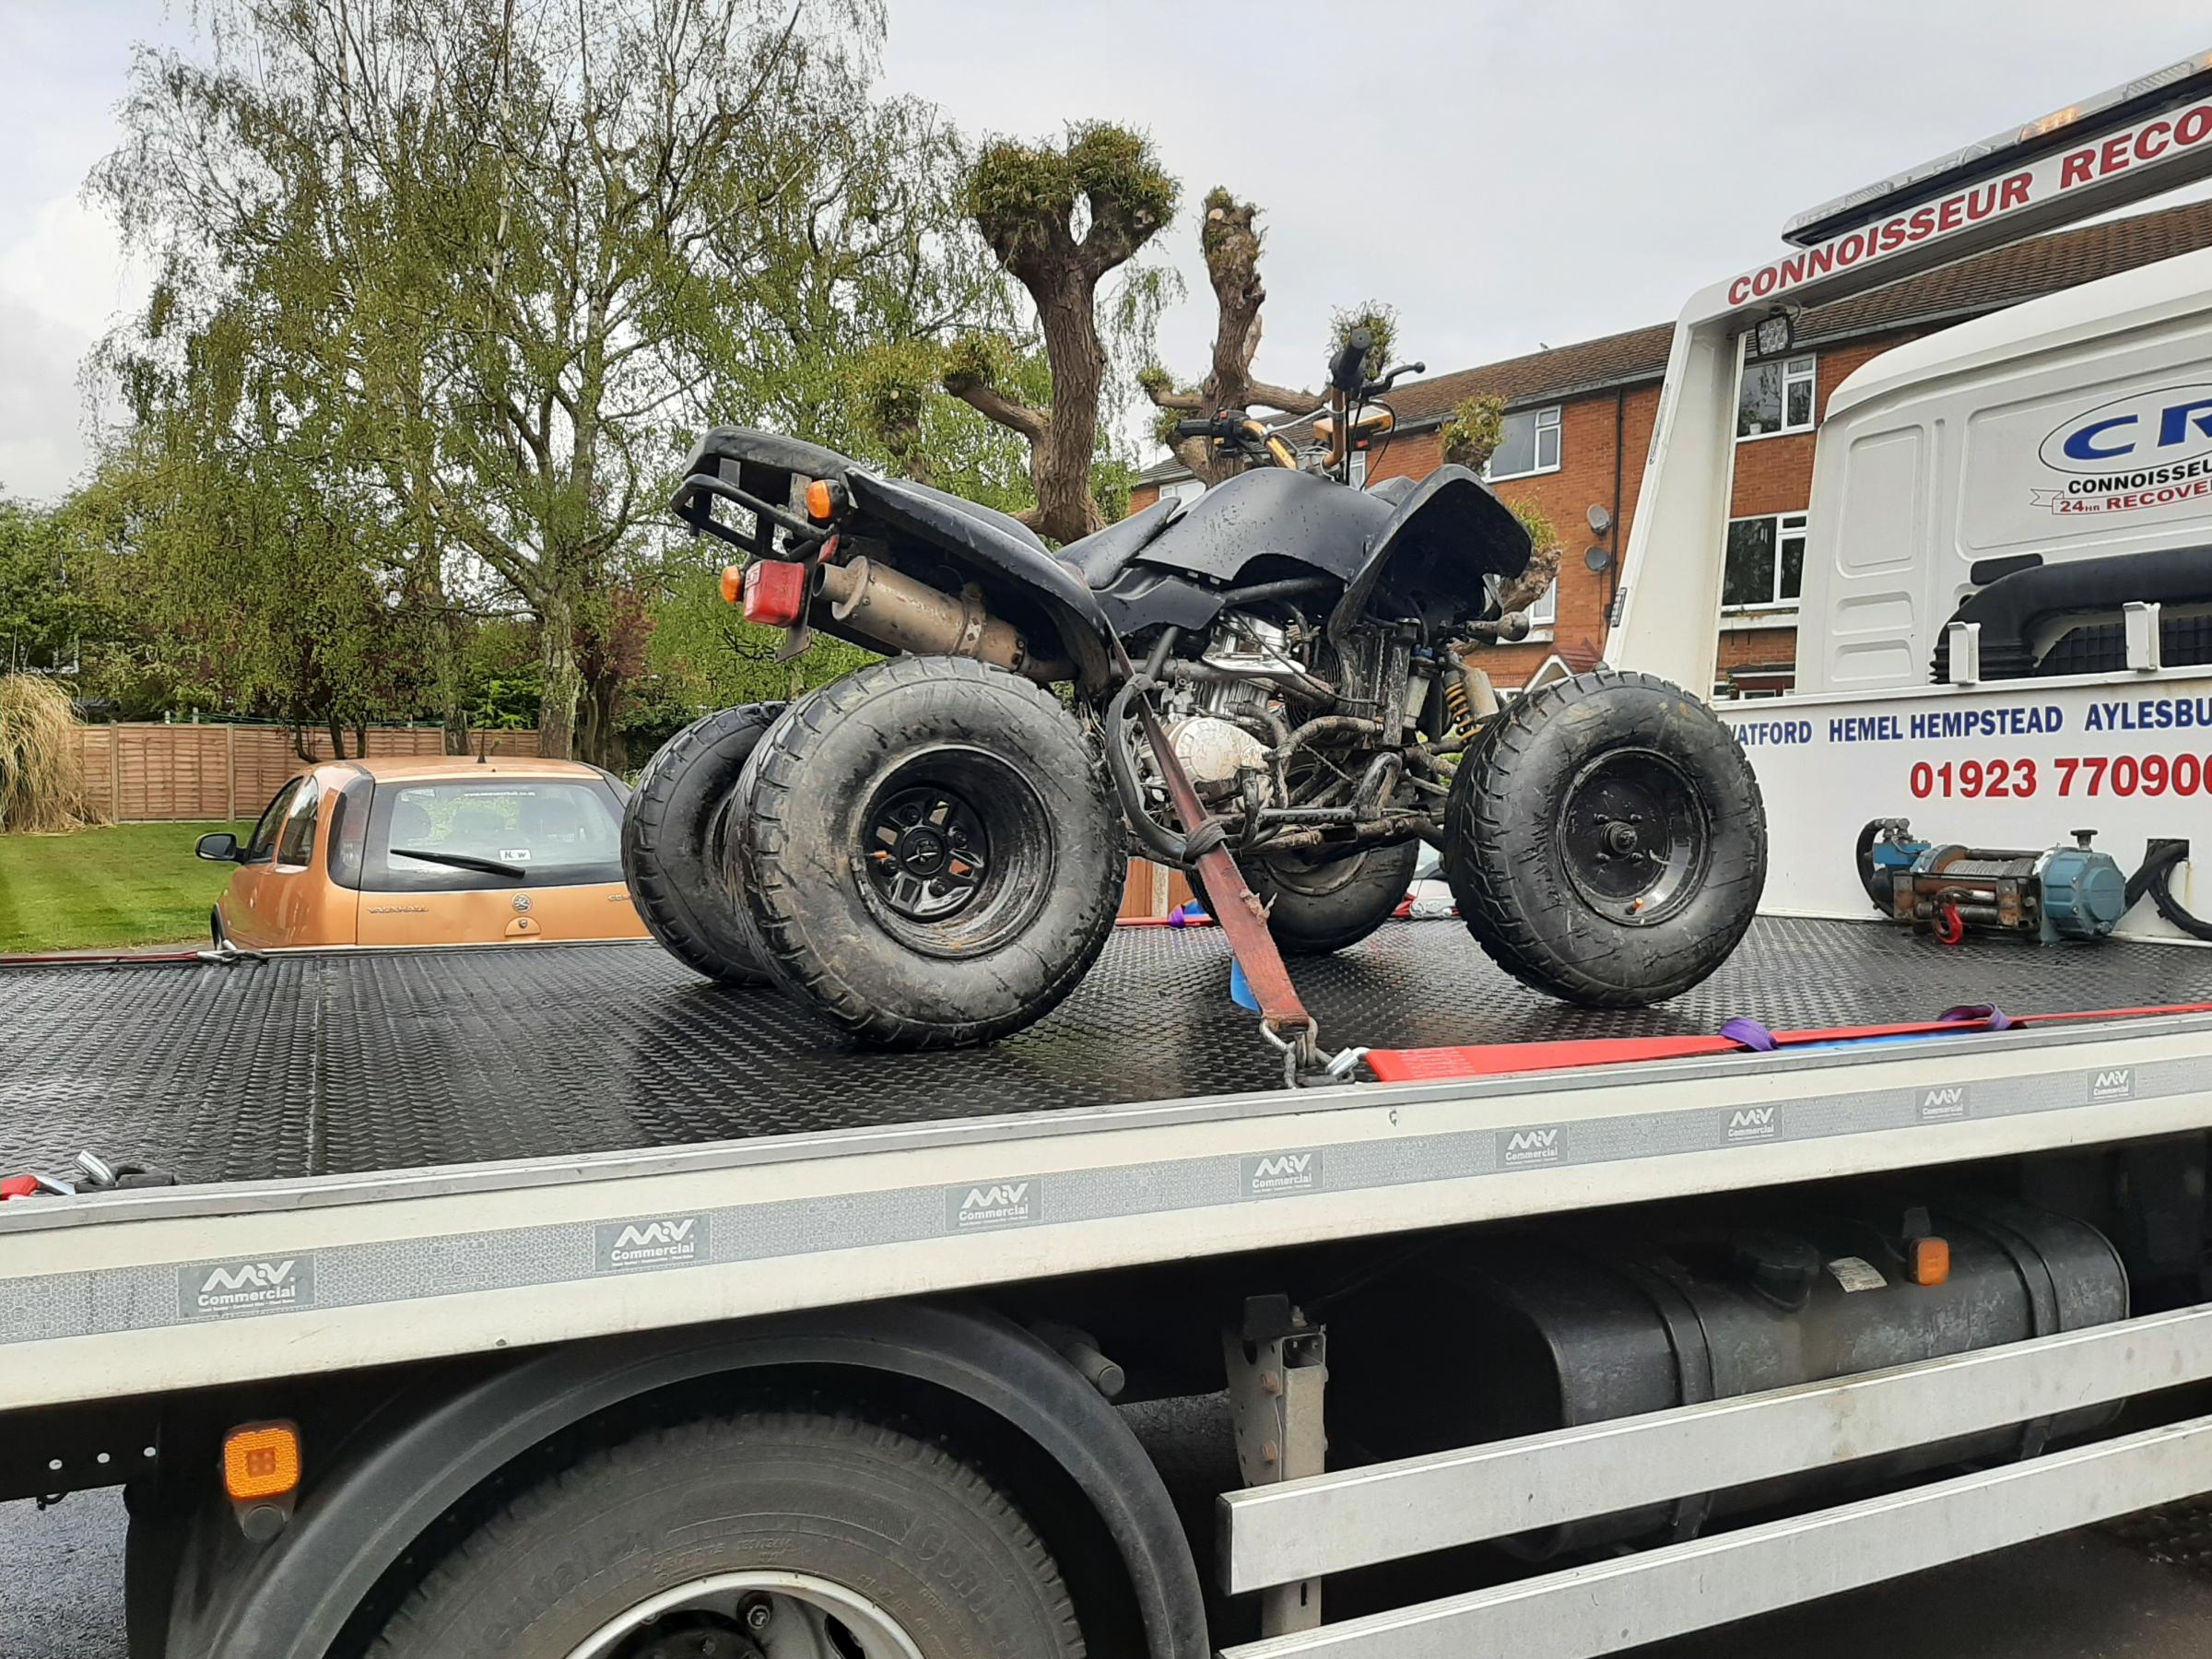 Police have recovered a nuisance quad bike (Photo: Herts Constabulary)